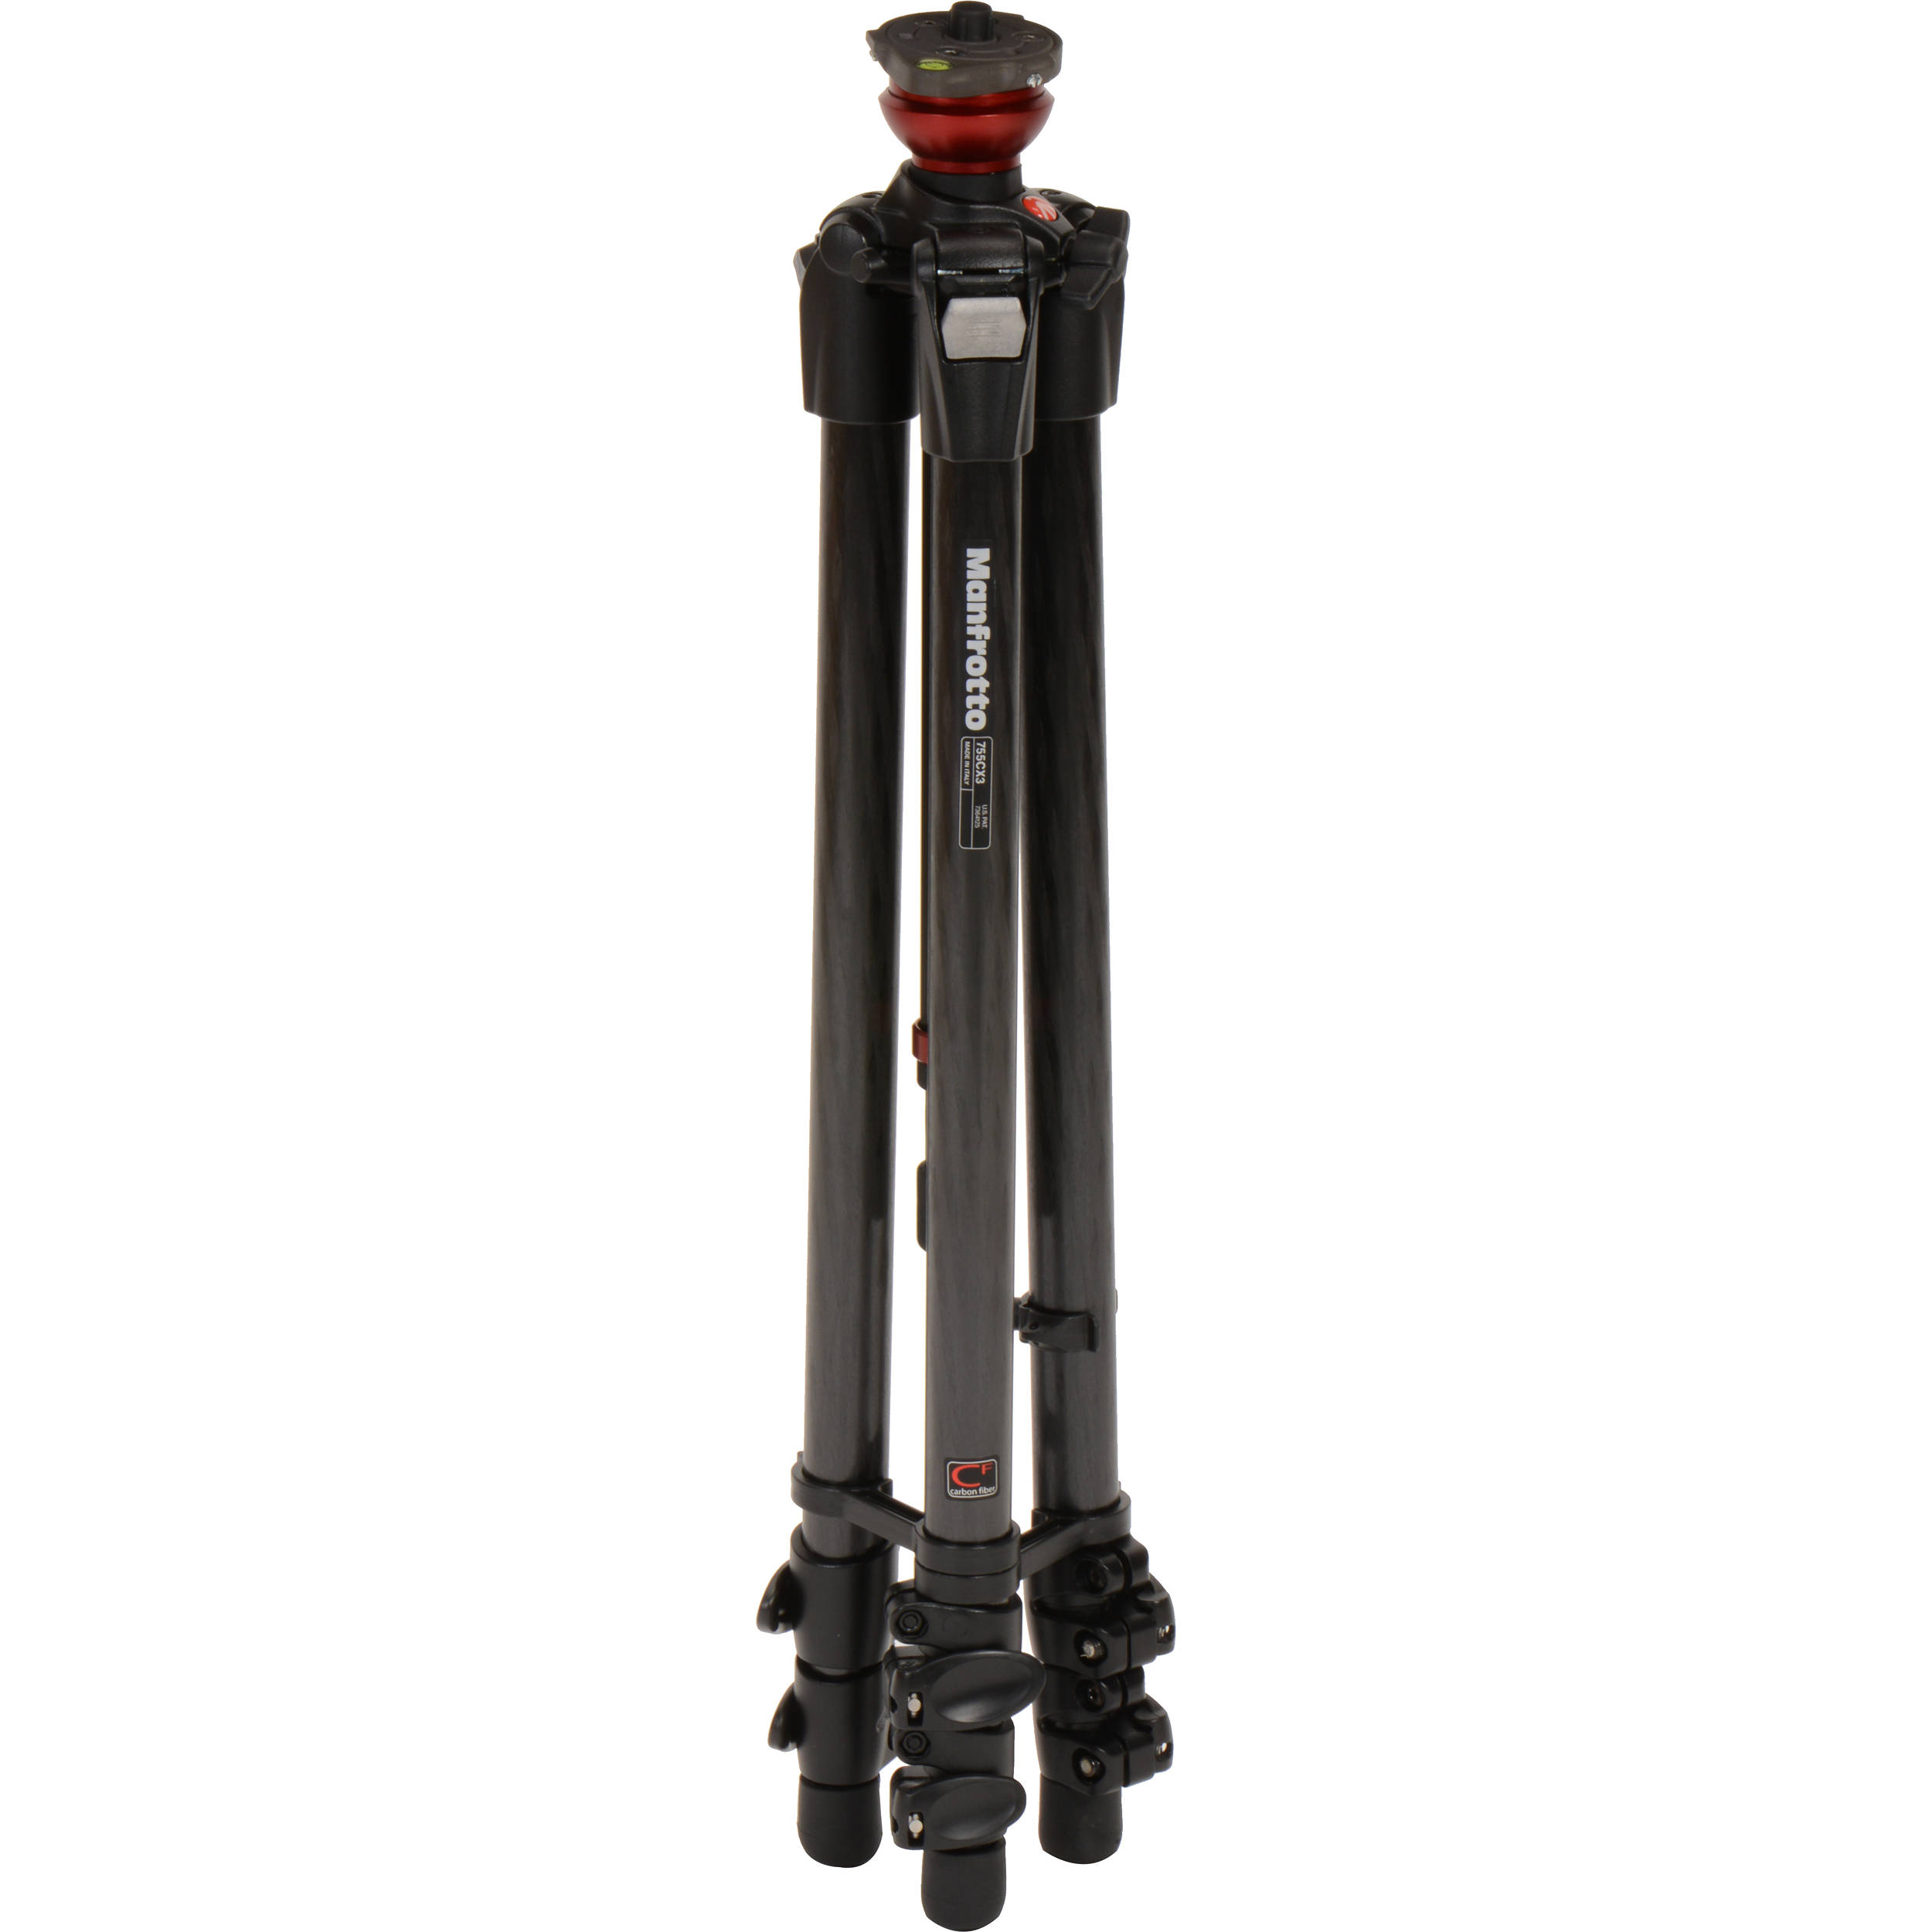 Manfrotto 500AH755CX Manfrotto 755CX3 Tripod With 500AH Head And Padded Bag Kit